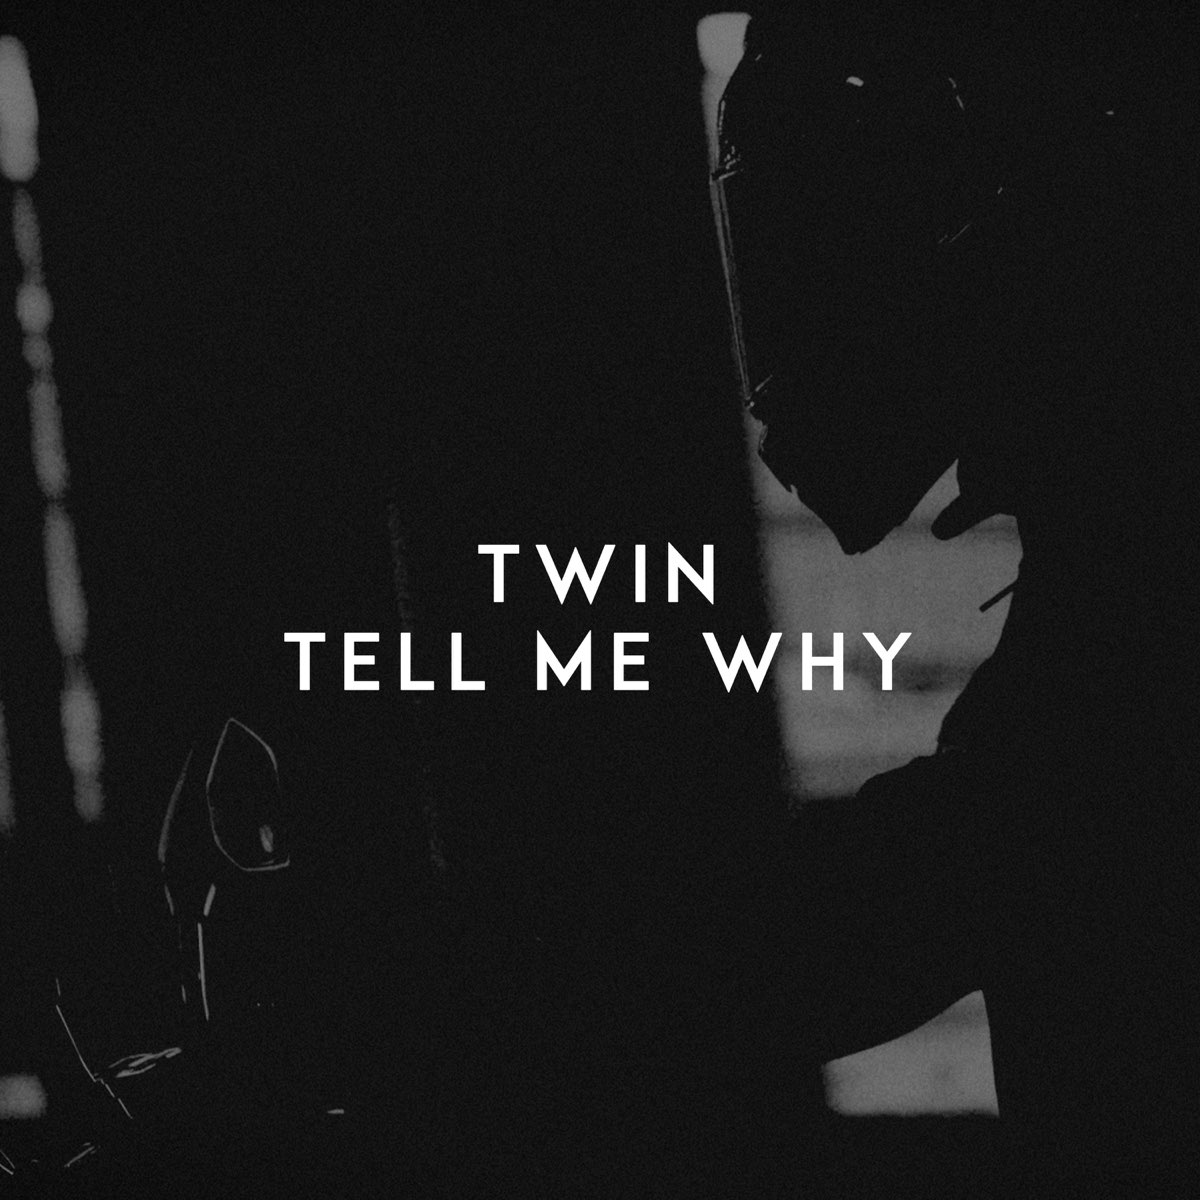 Tell me why boy. Tell me why?. Tell me why обложка. Альбом tell me why...... Twin - tell me why.